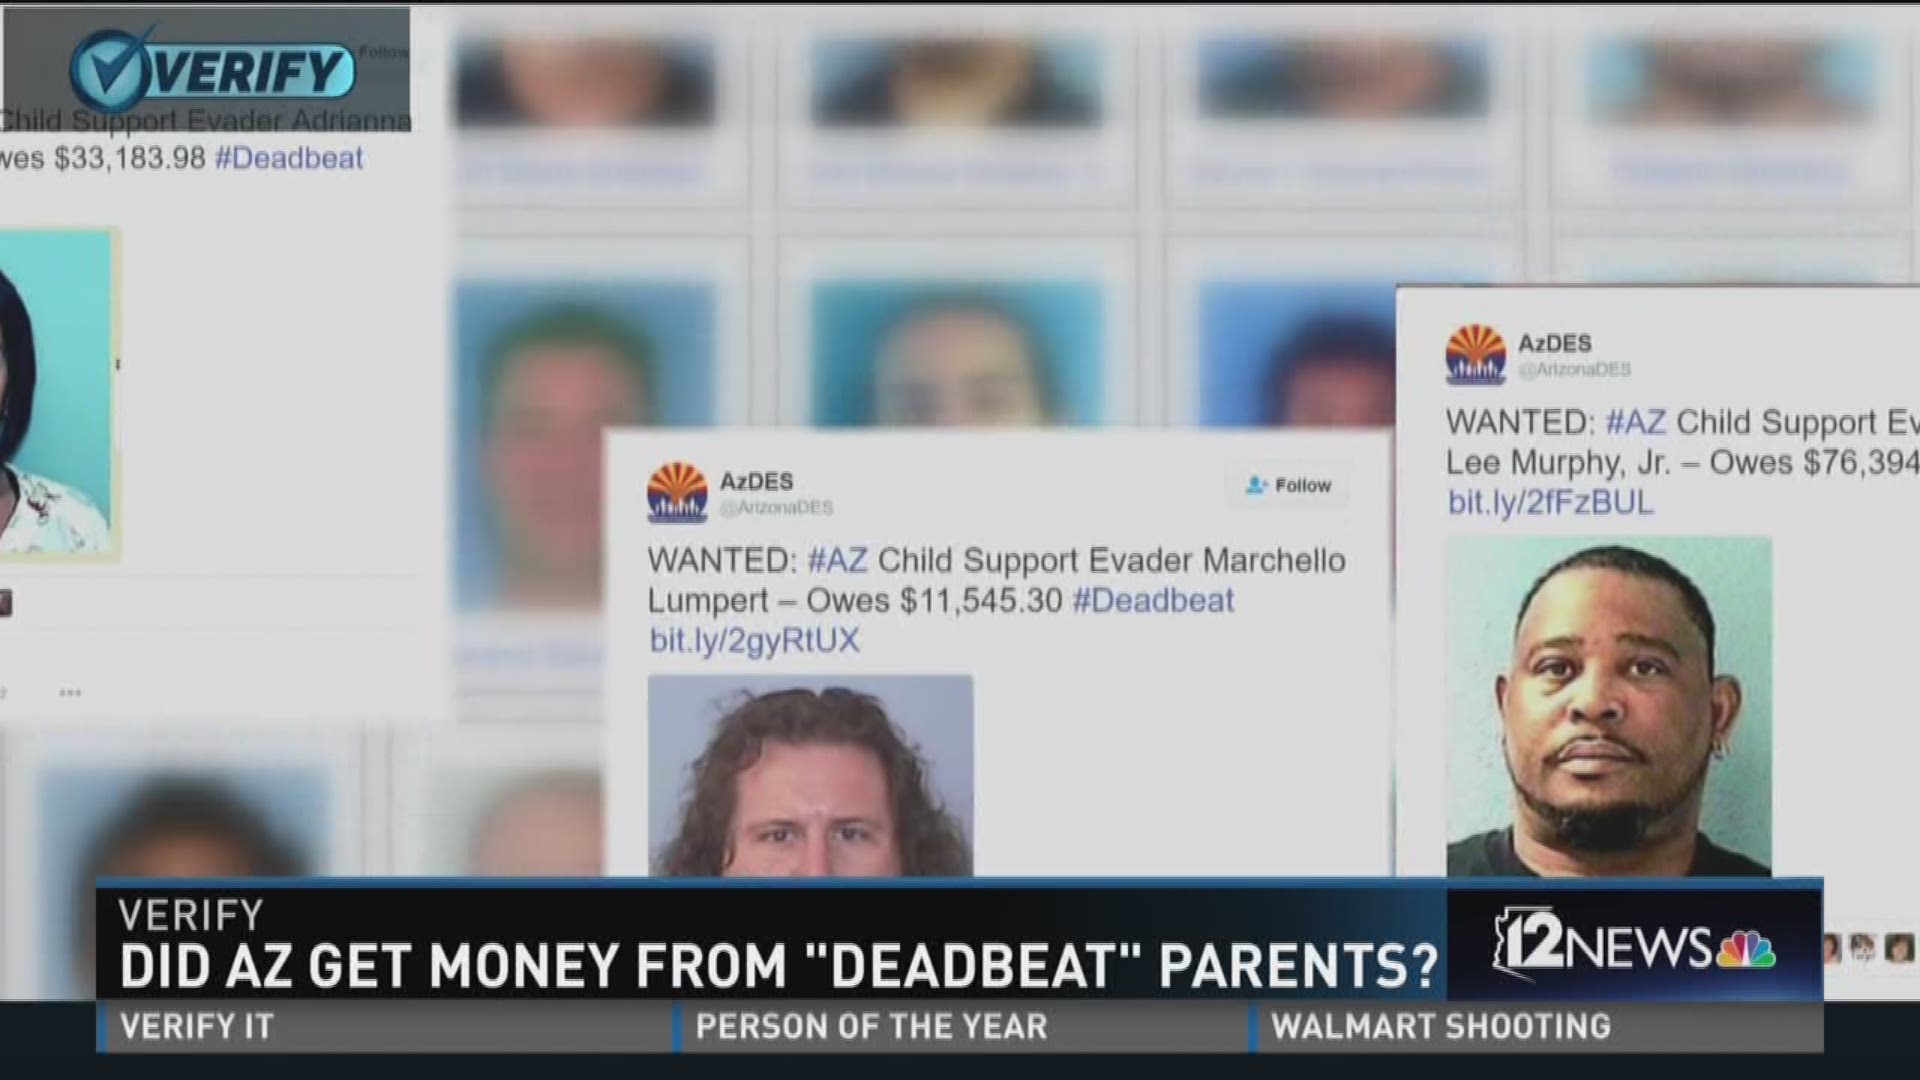 Did Arizona actually get any money from "deadbeat" parents?